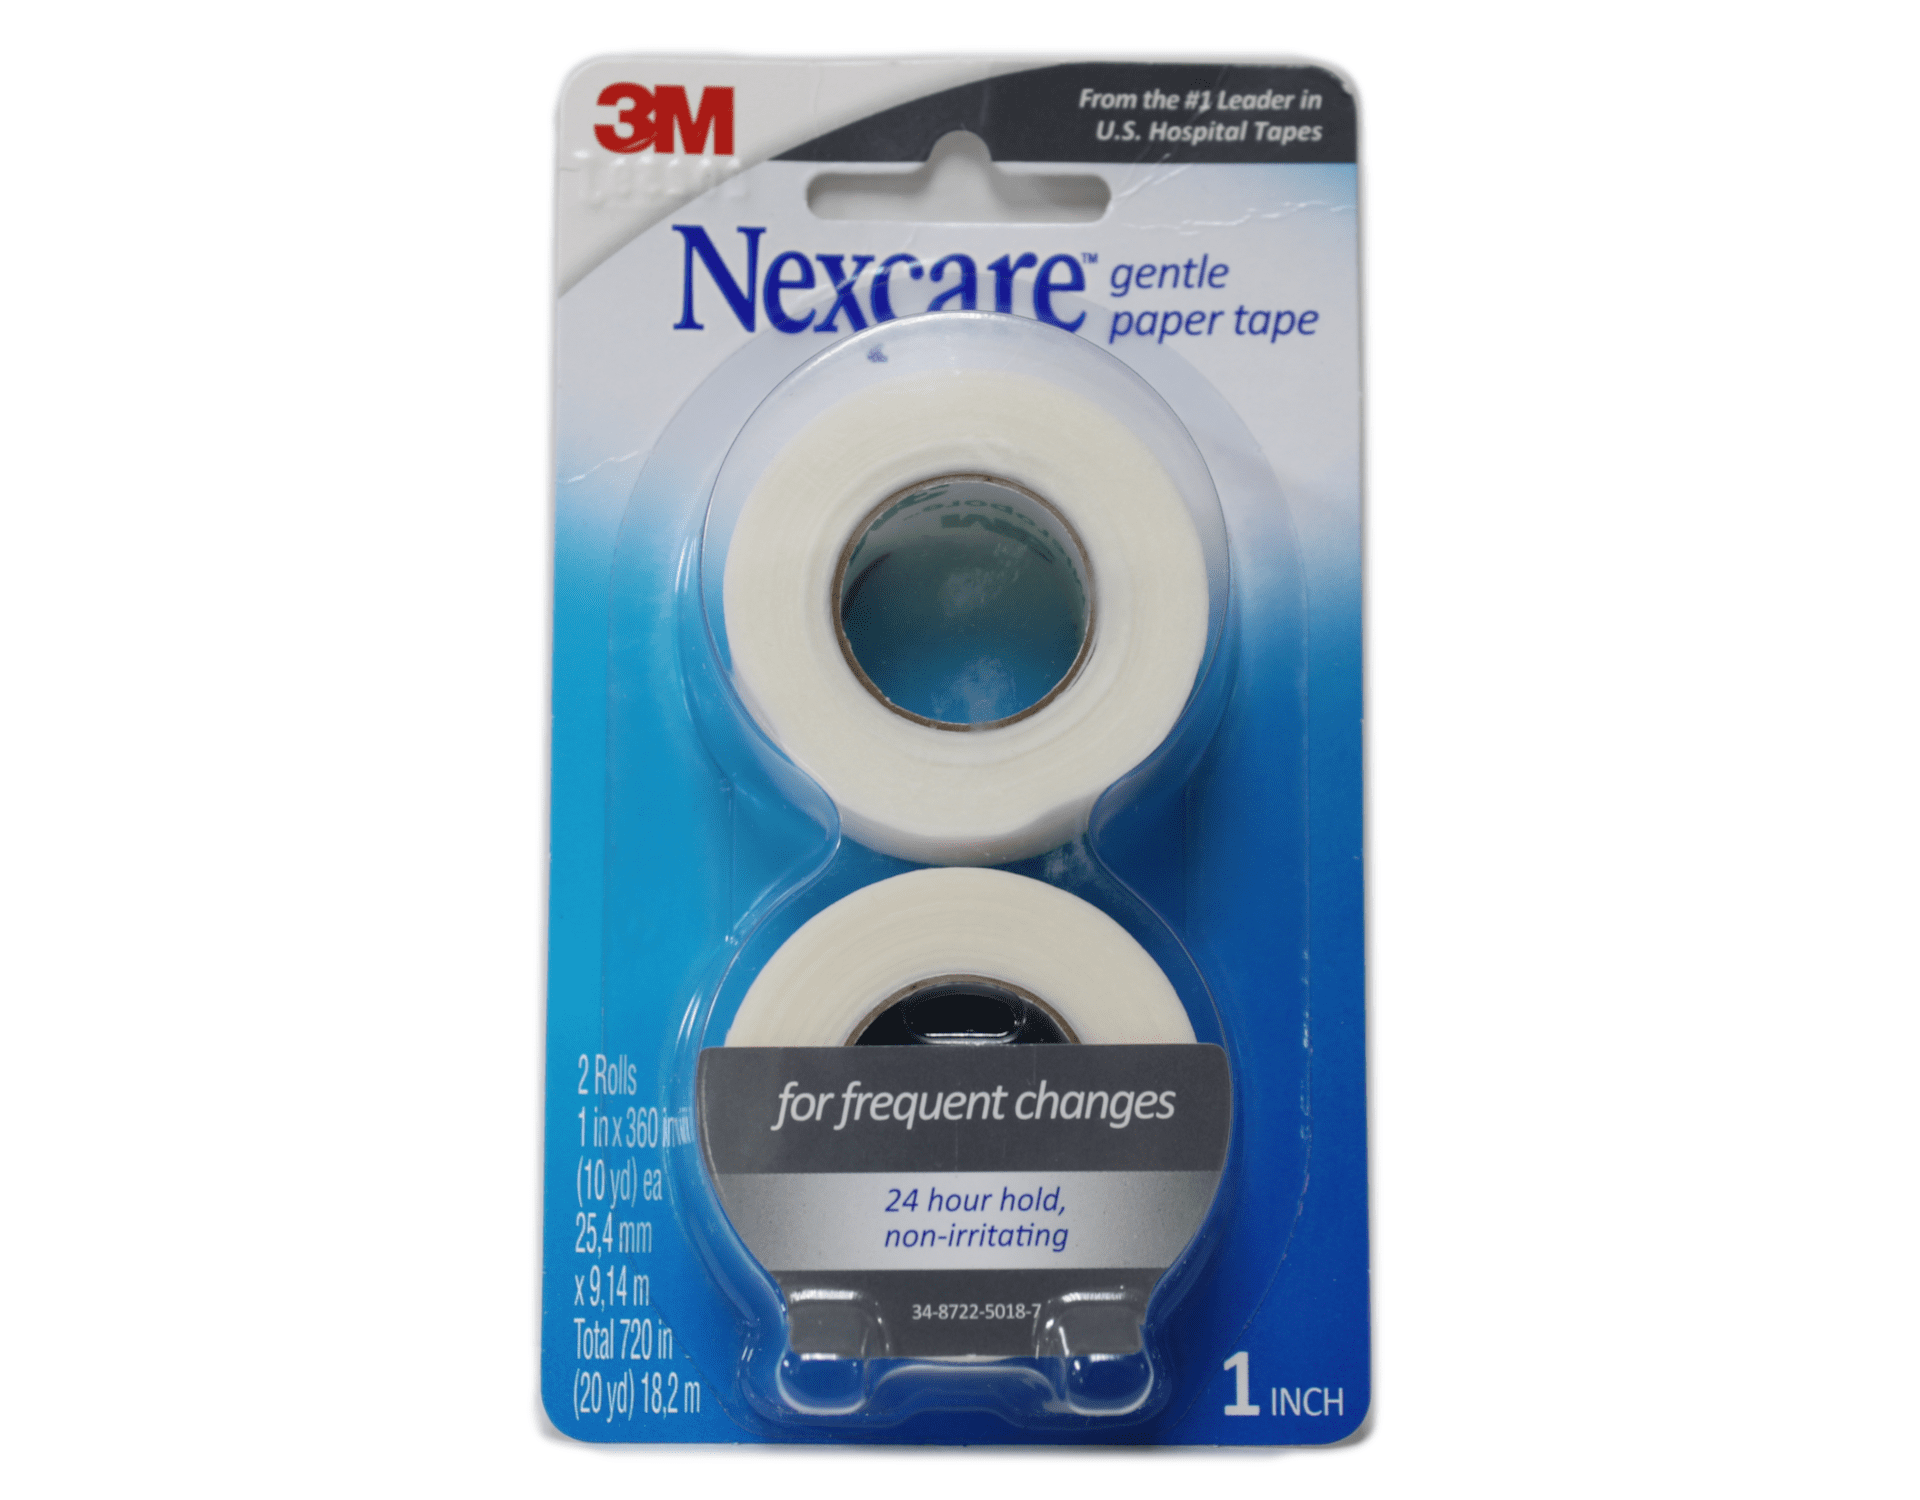 3M Nexcare Micropore First Aid Paper Tape 1in x 360 in (10yd) – New Road  Health Supply